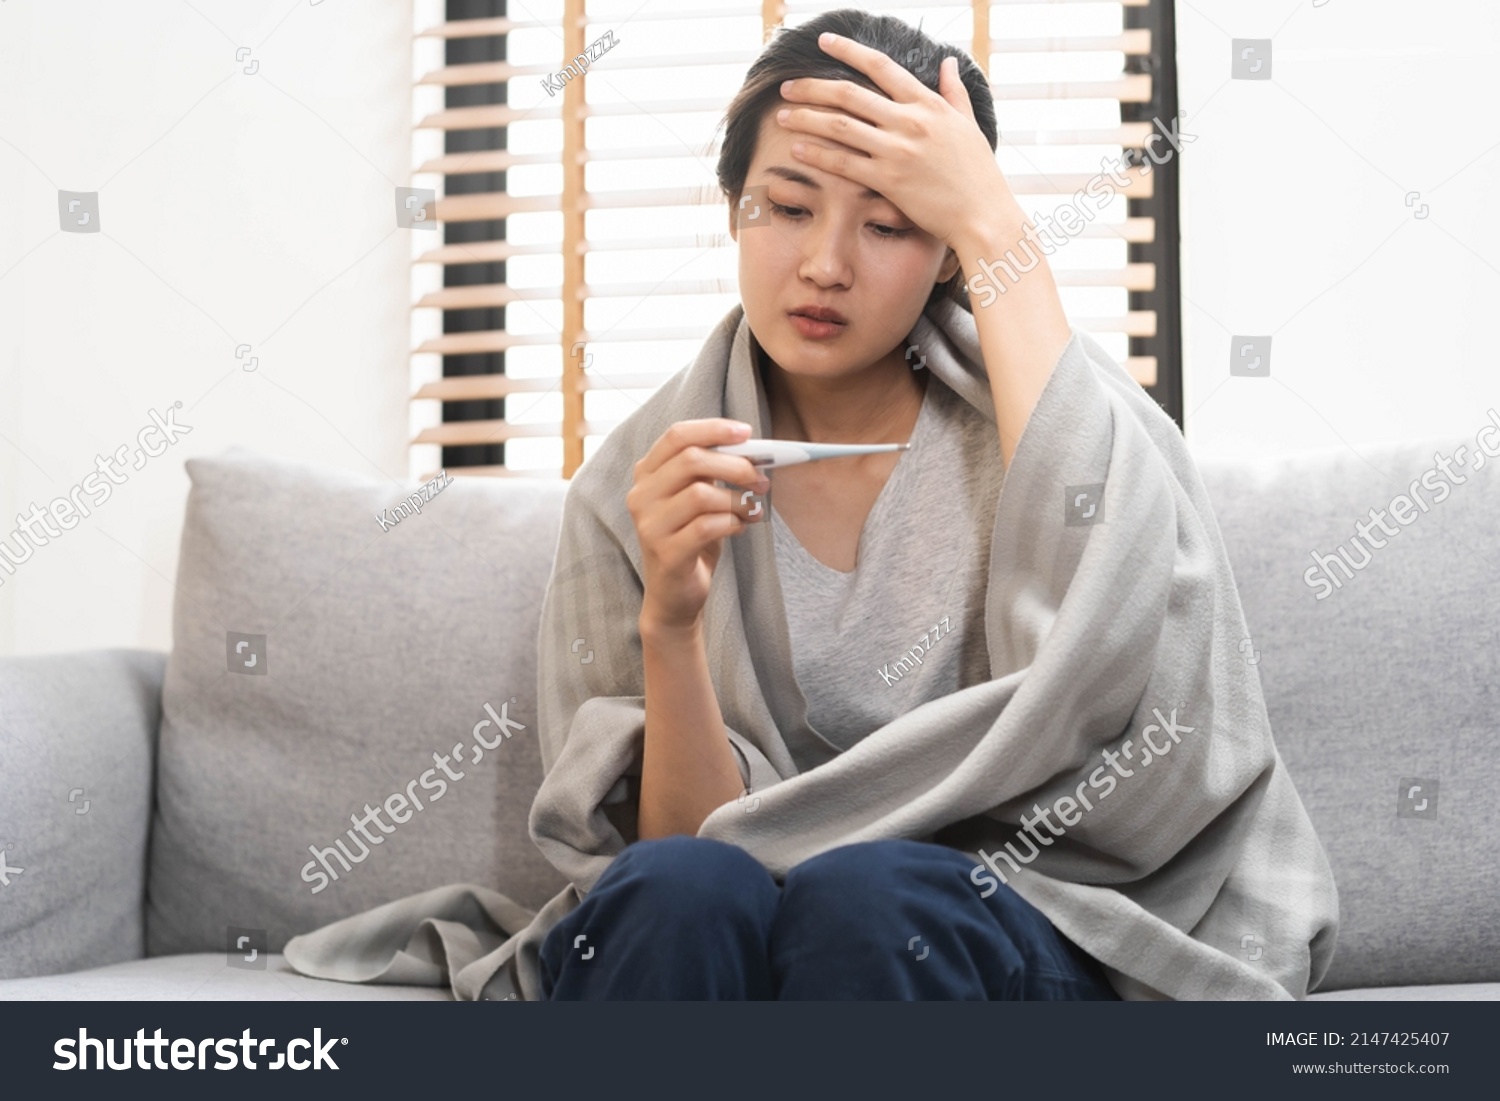 Sick, influenza asian young woman, girl headache have a fever, flu and check thermometer measure body temperature, feel illness sitting on sofa bed at home. Health care person on virus, covid-19. #2147425407